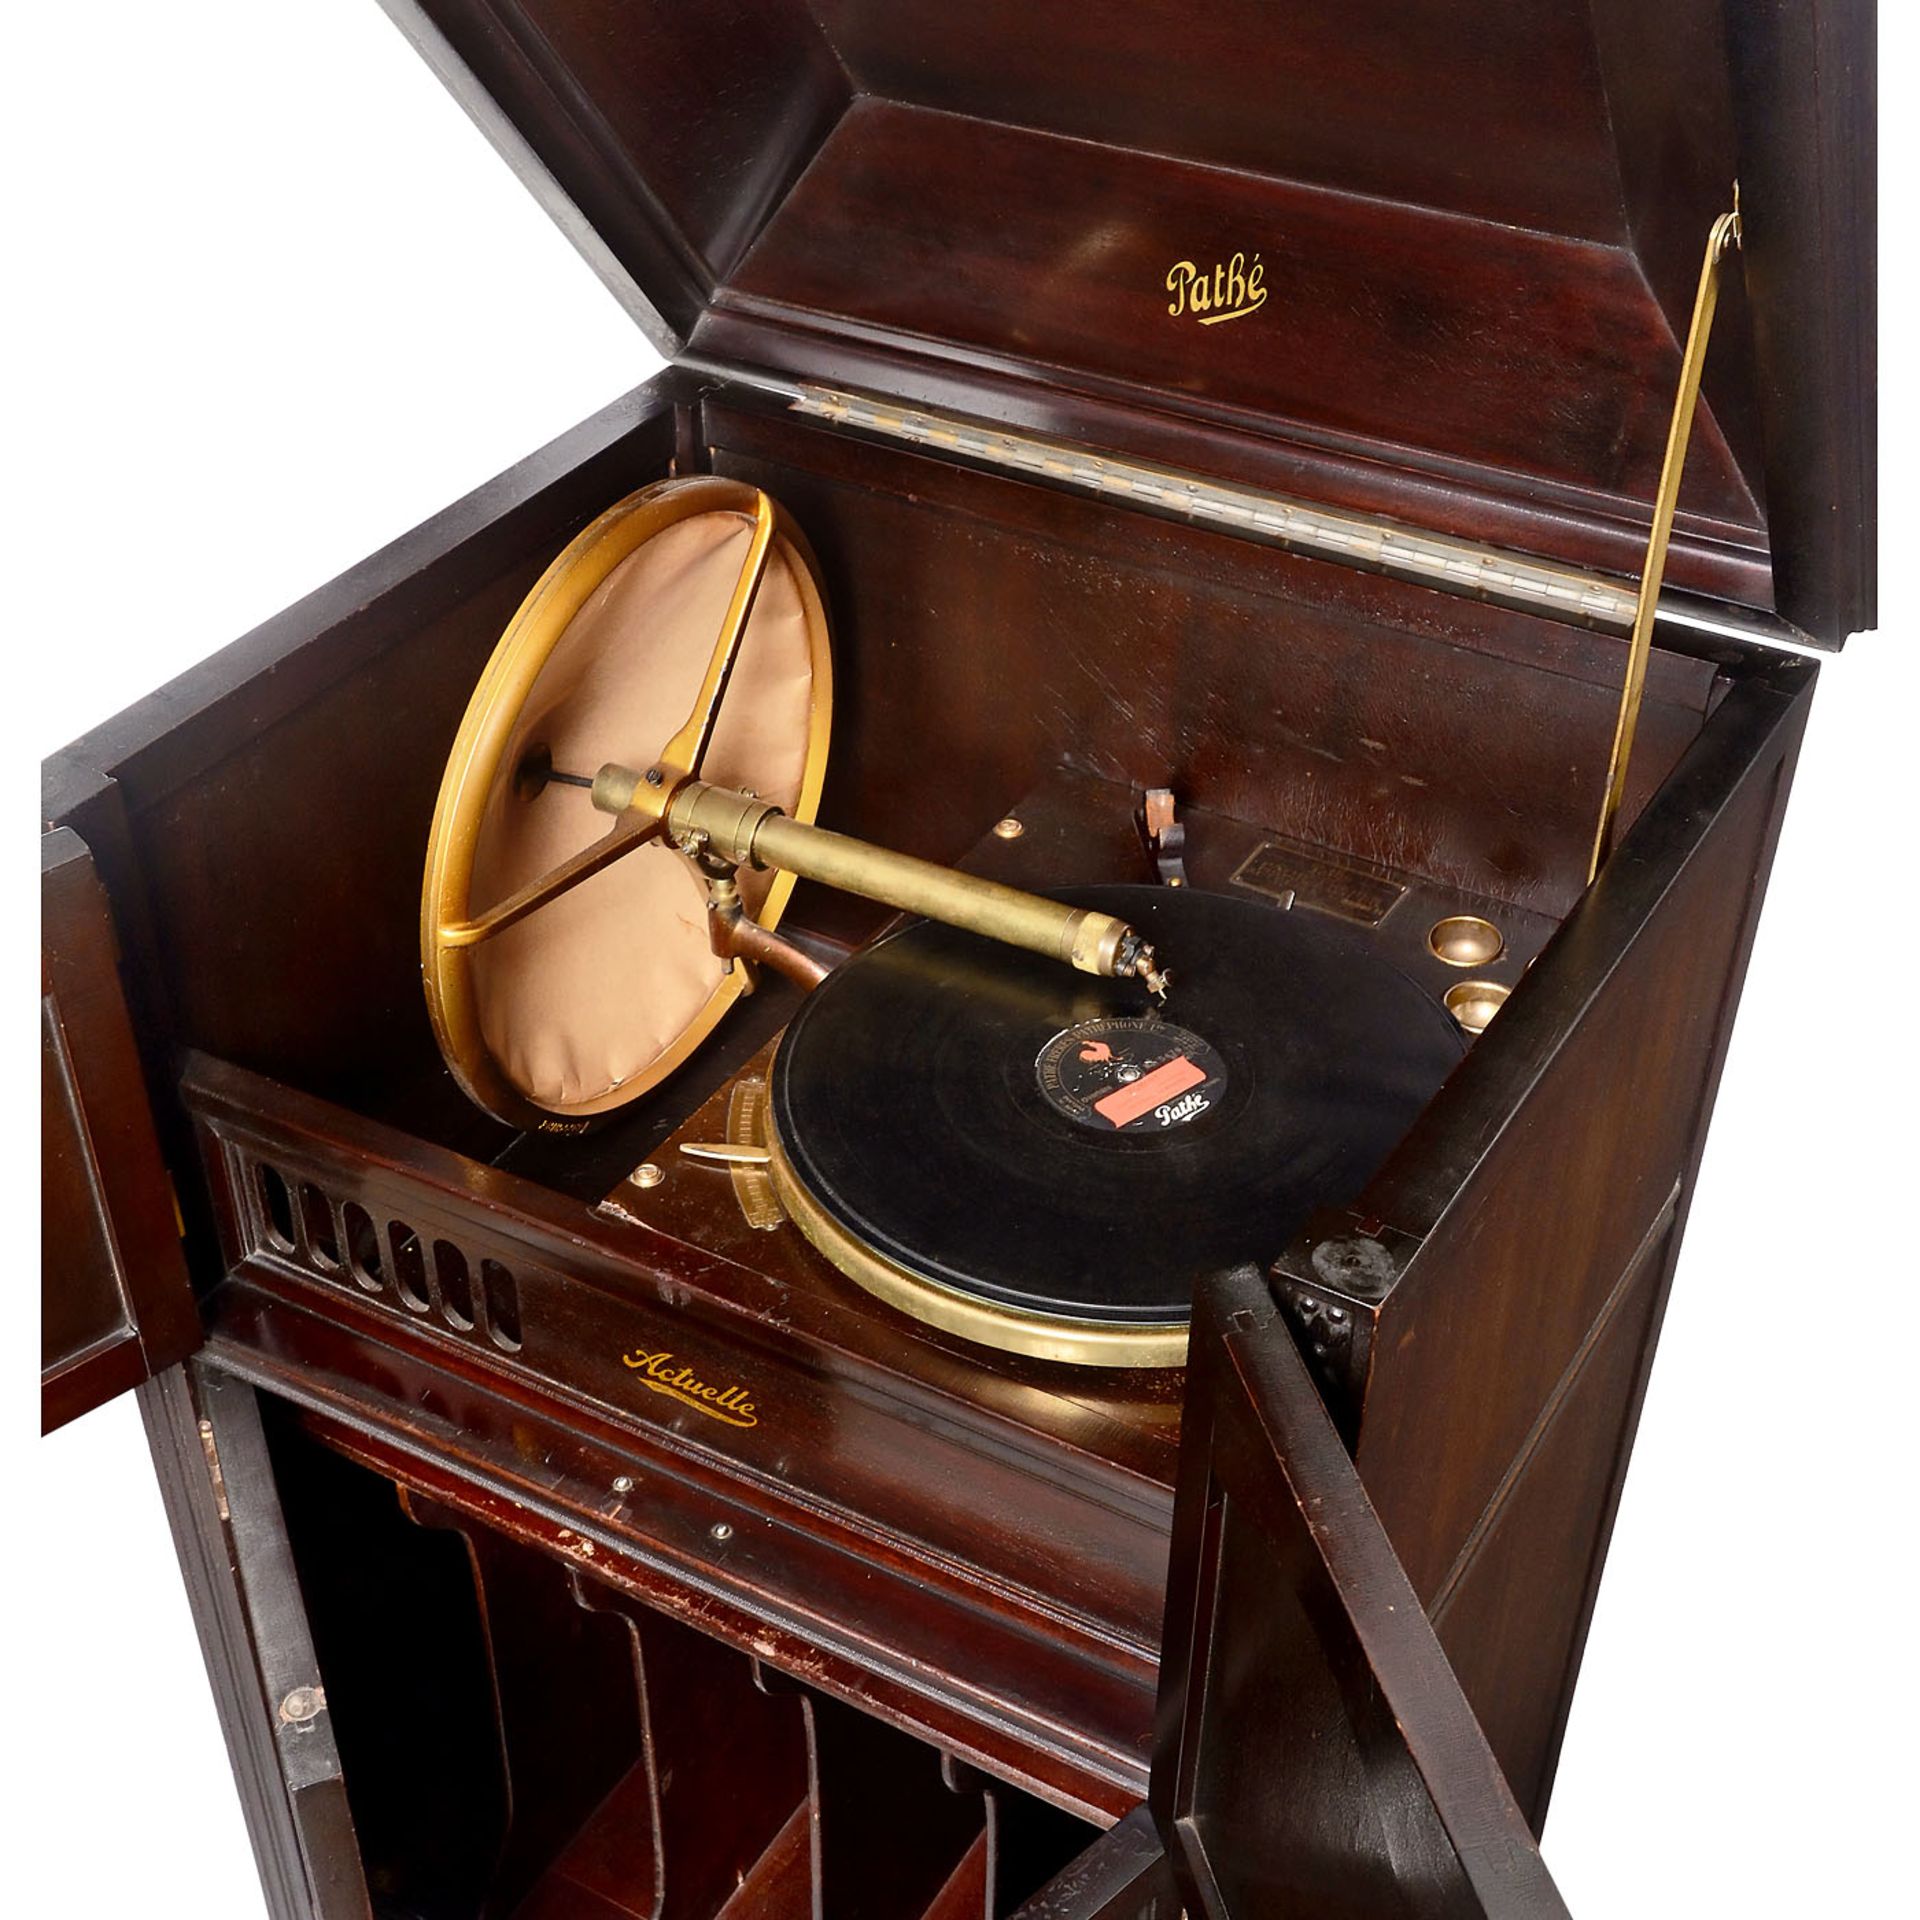 Pathé Actuelle Cabinet Gramophone, c. 1925 - Image 2 of 2